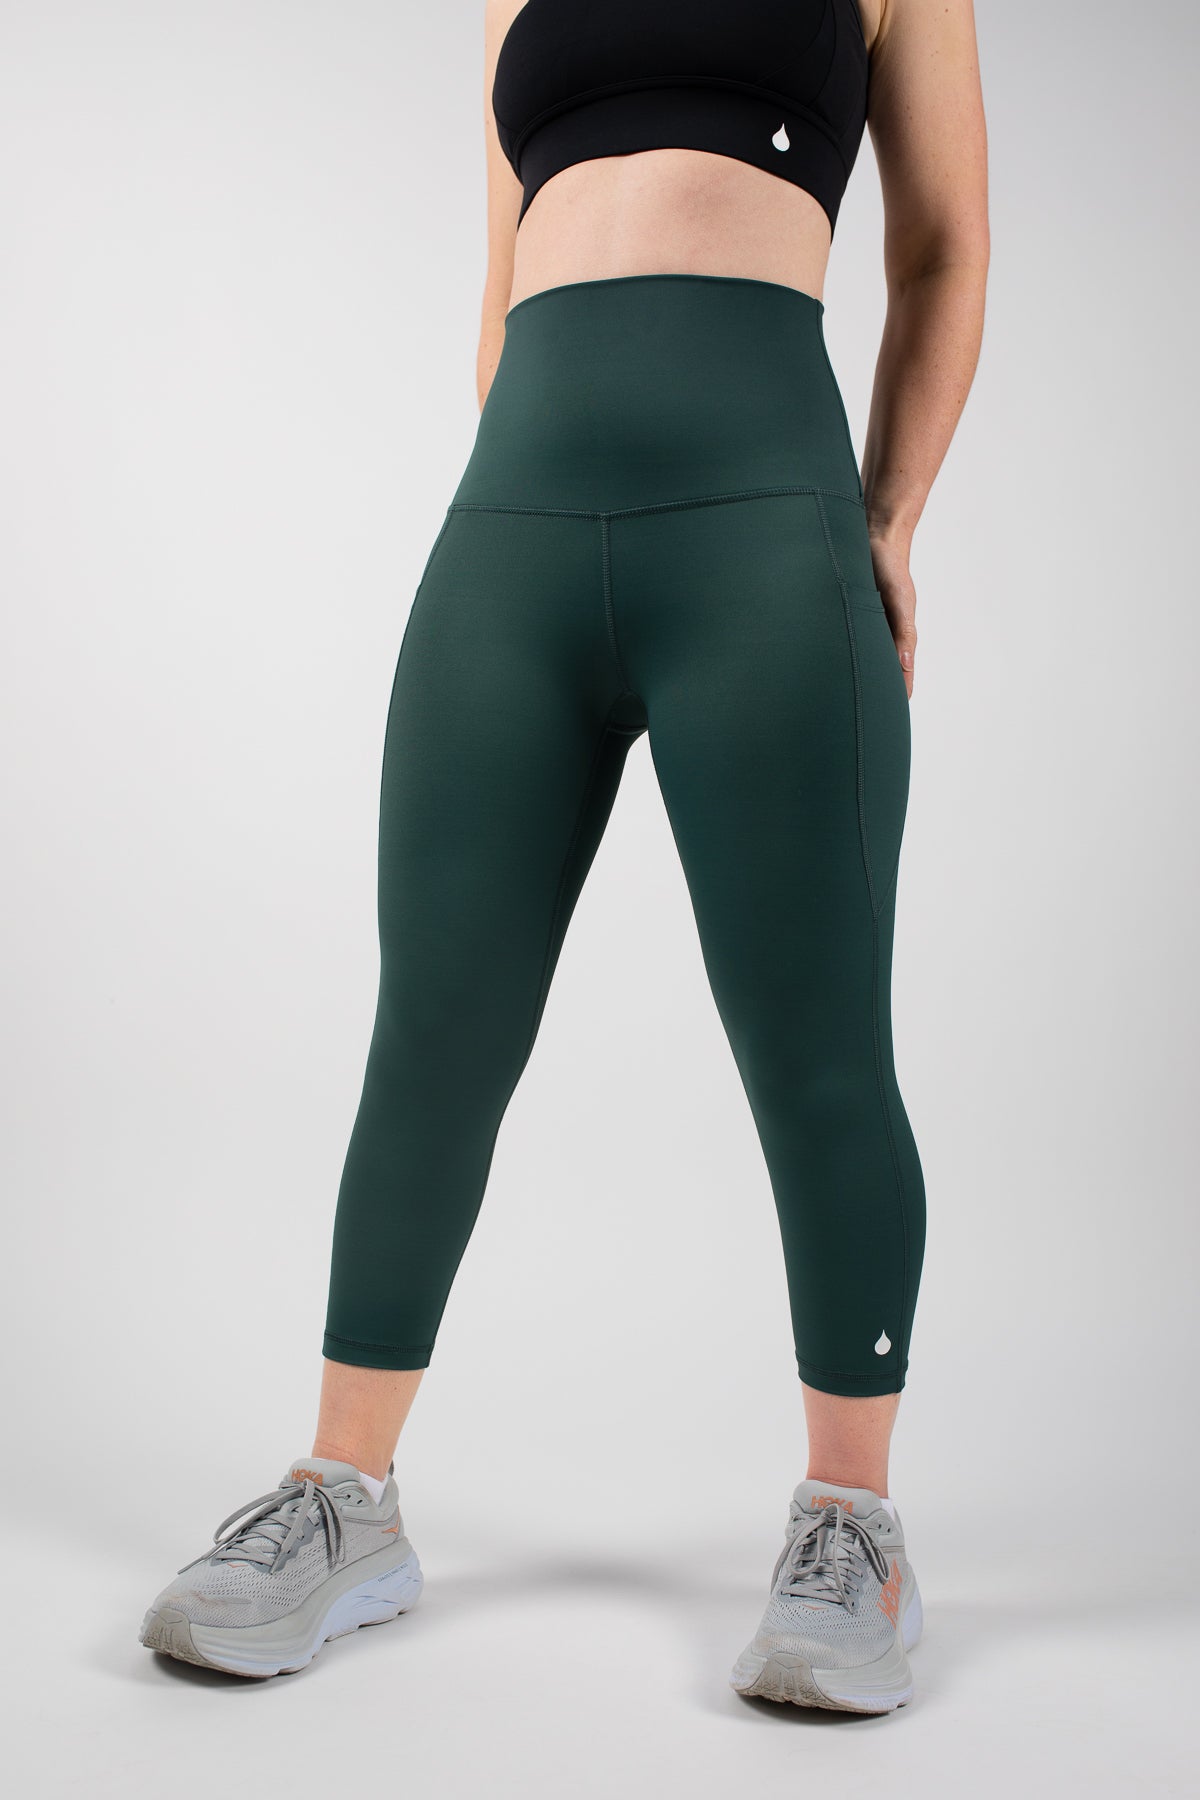 Forest Green Everyday Legging - 7/8 length - Mama Movement